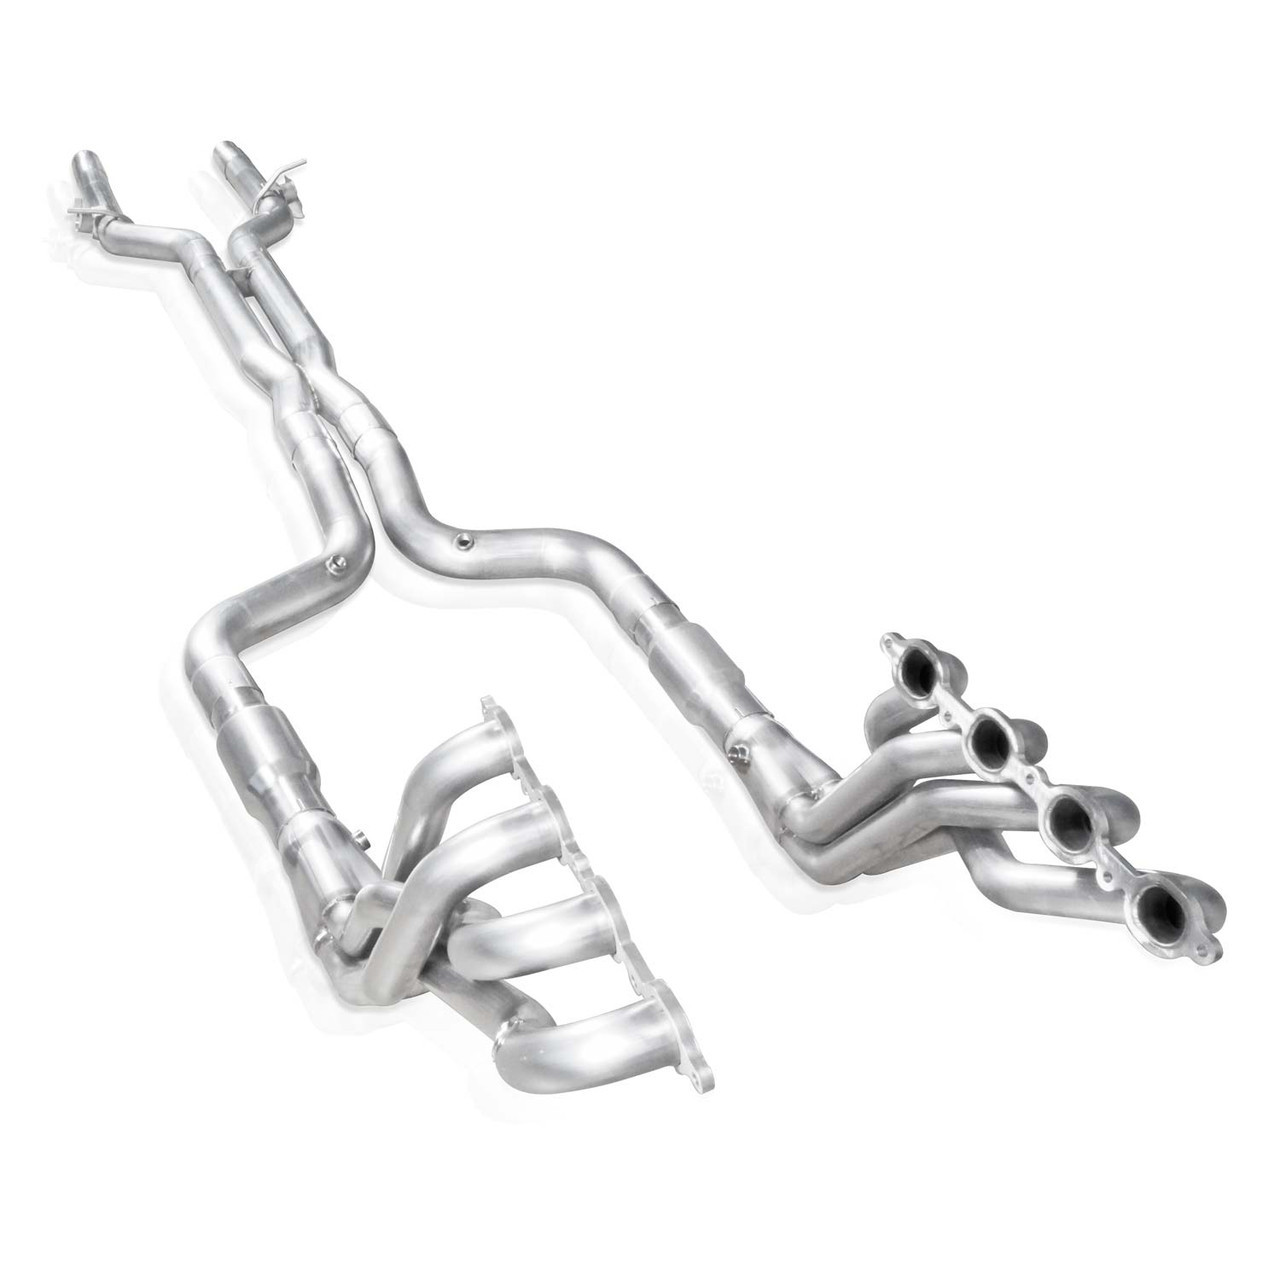 Stainless Works CA16HCATST Headers, 1-7/8 in Primary, 3 in Collector, Converters Included, 3 in X-Pipe Included, Stainless, Natural, Chevy Camaro 2016-20, Kit